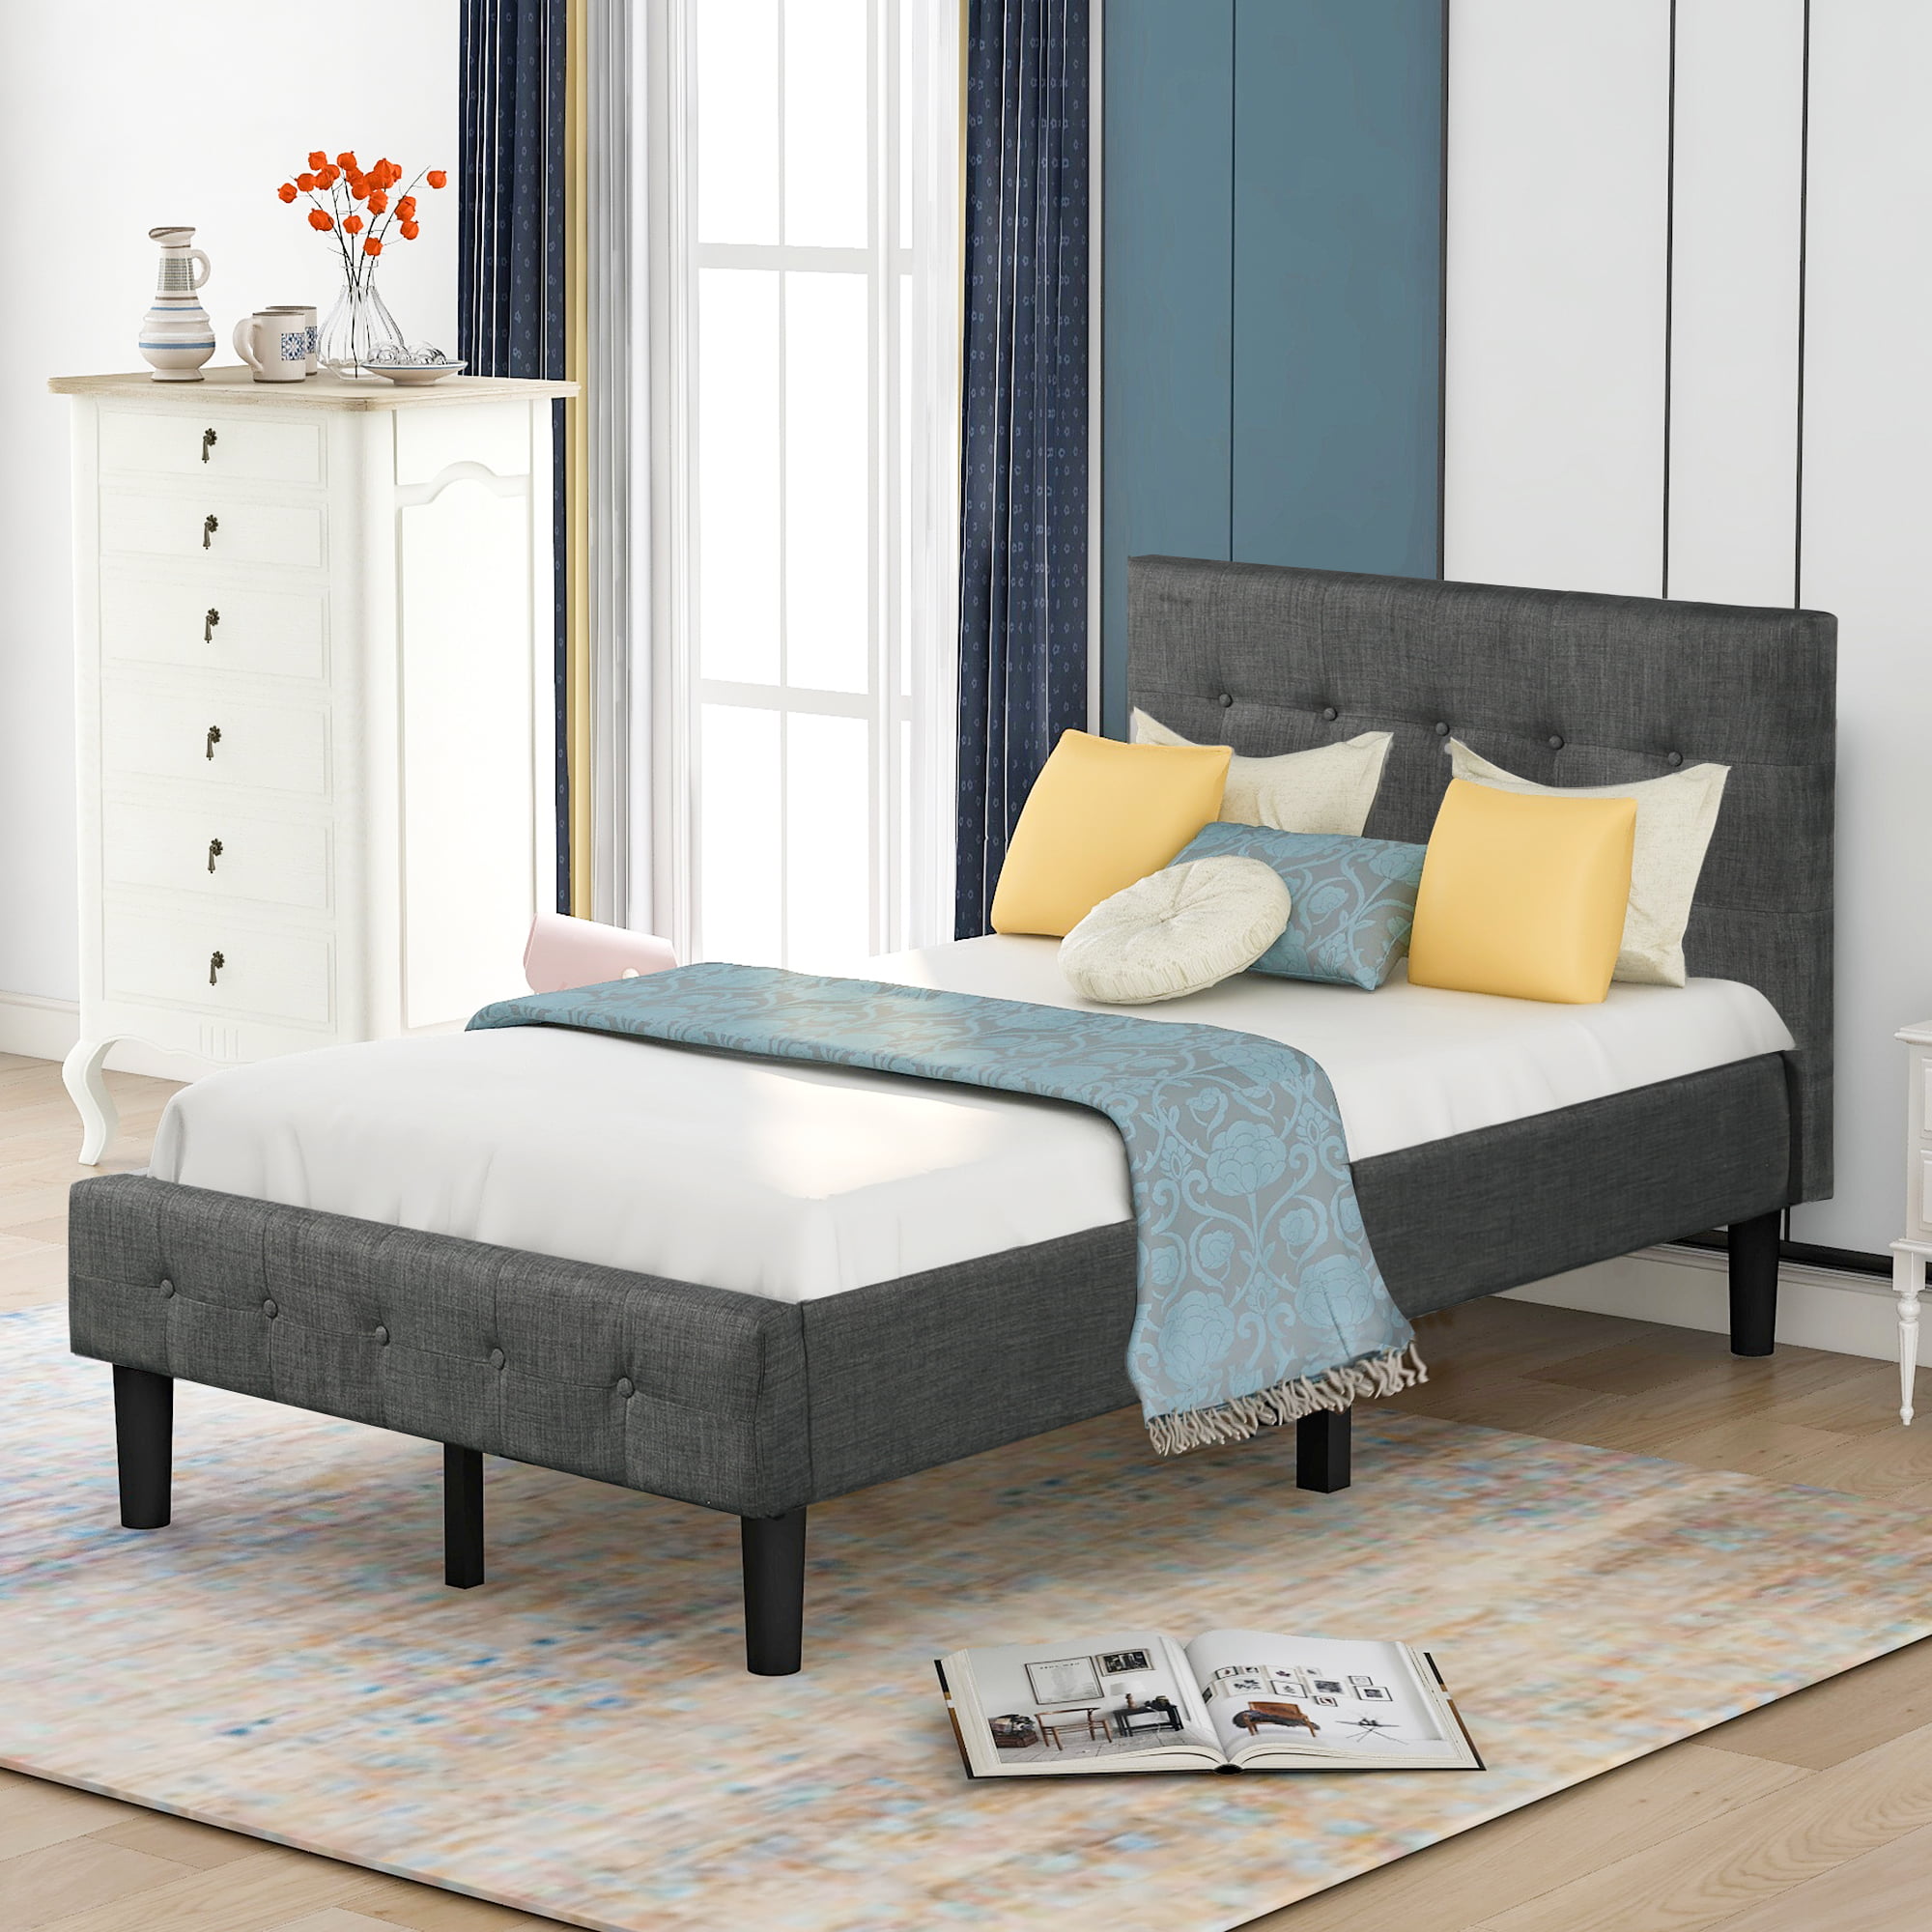 Clearance! Twin Bed Frame with Headboard, Modern Fabric Upholstered